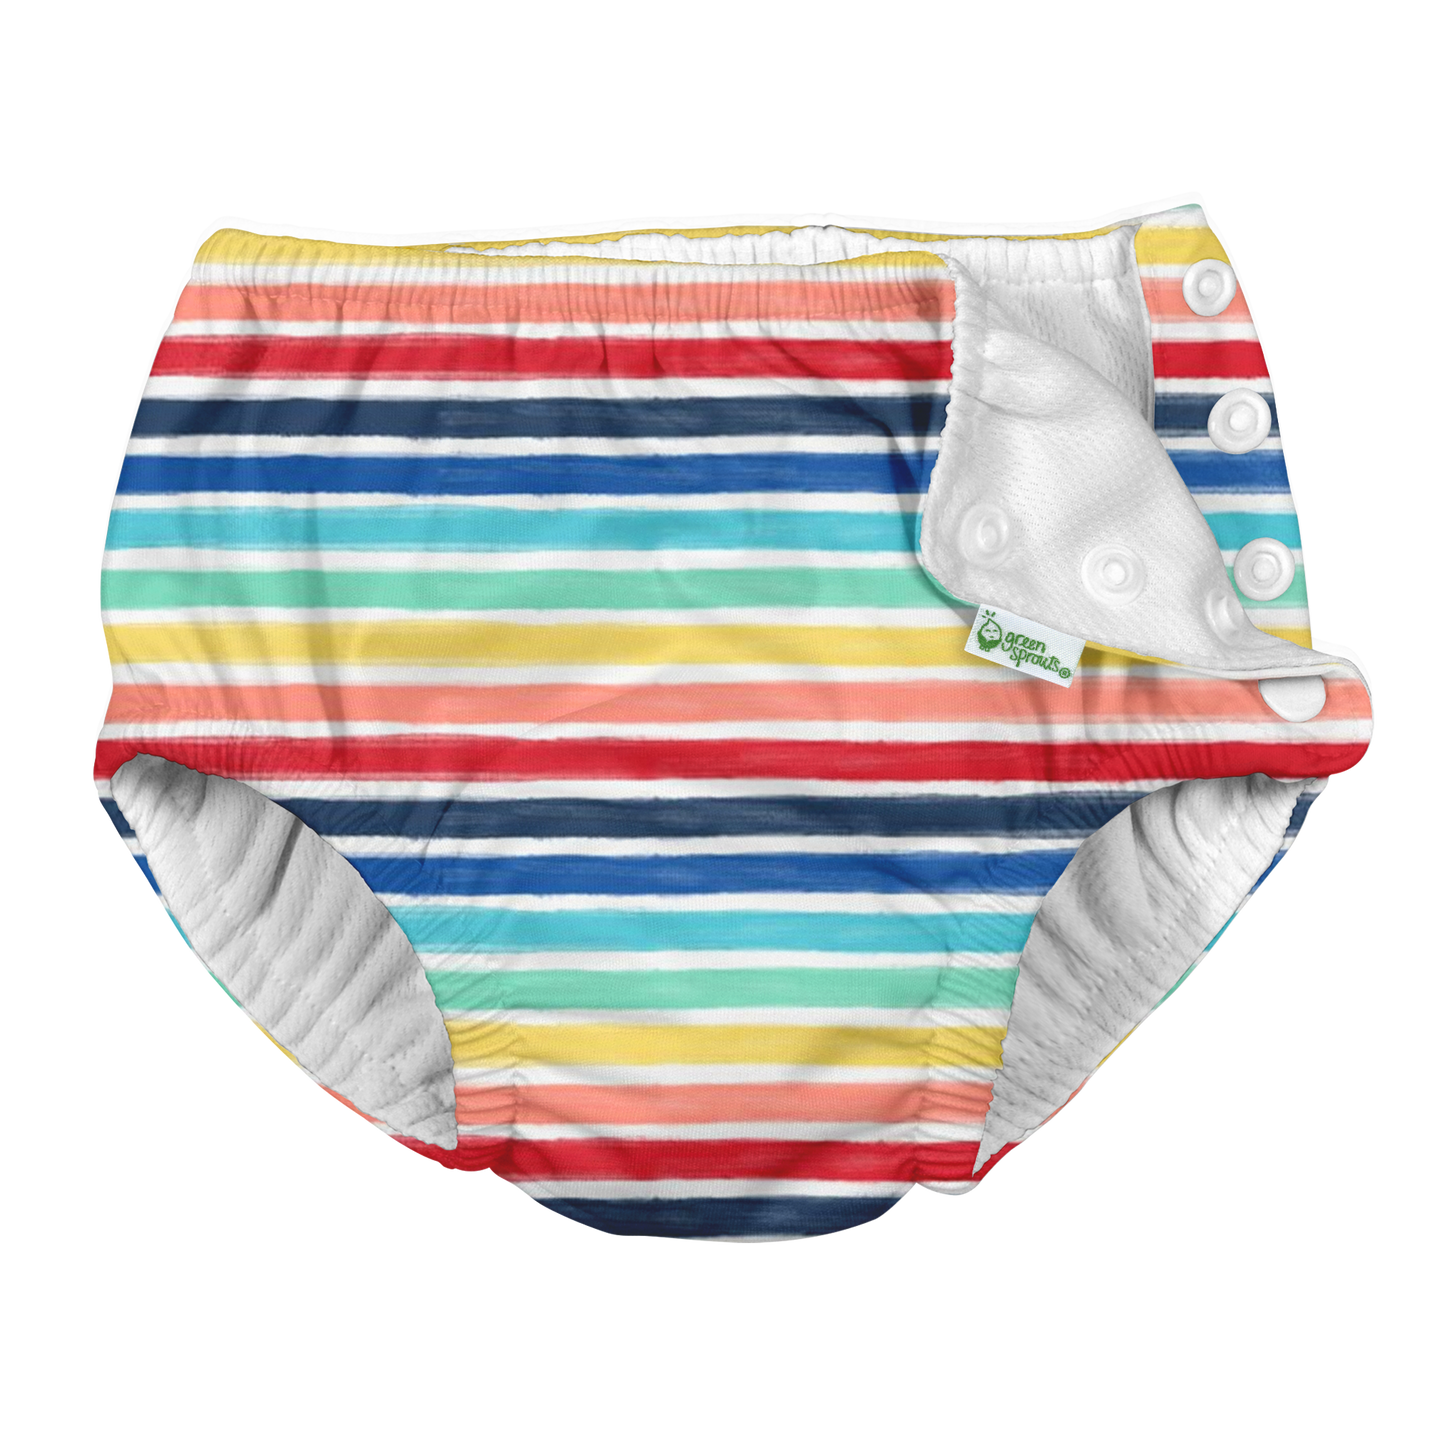 Green Sprouts - Snap Reusable Absorbent Swimsuit Diaper - Fresh Prints